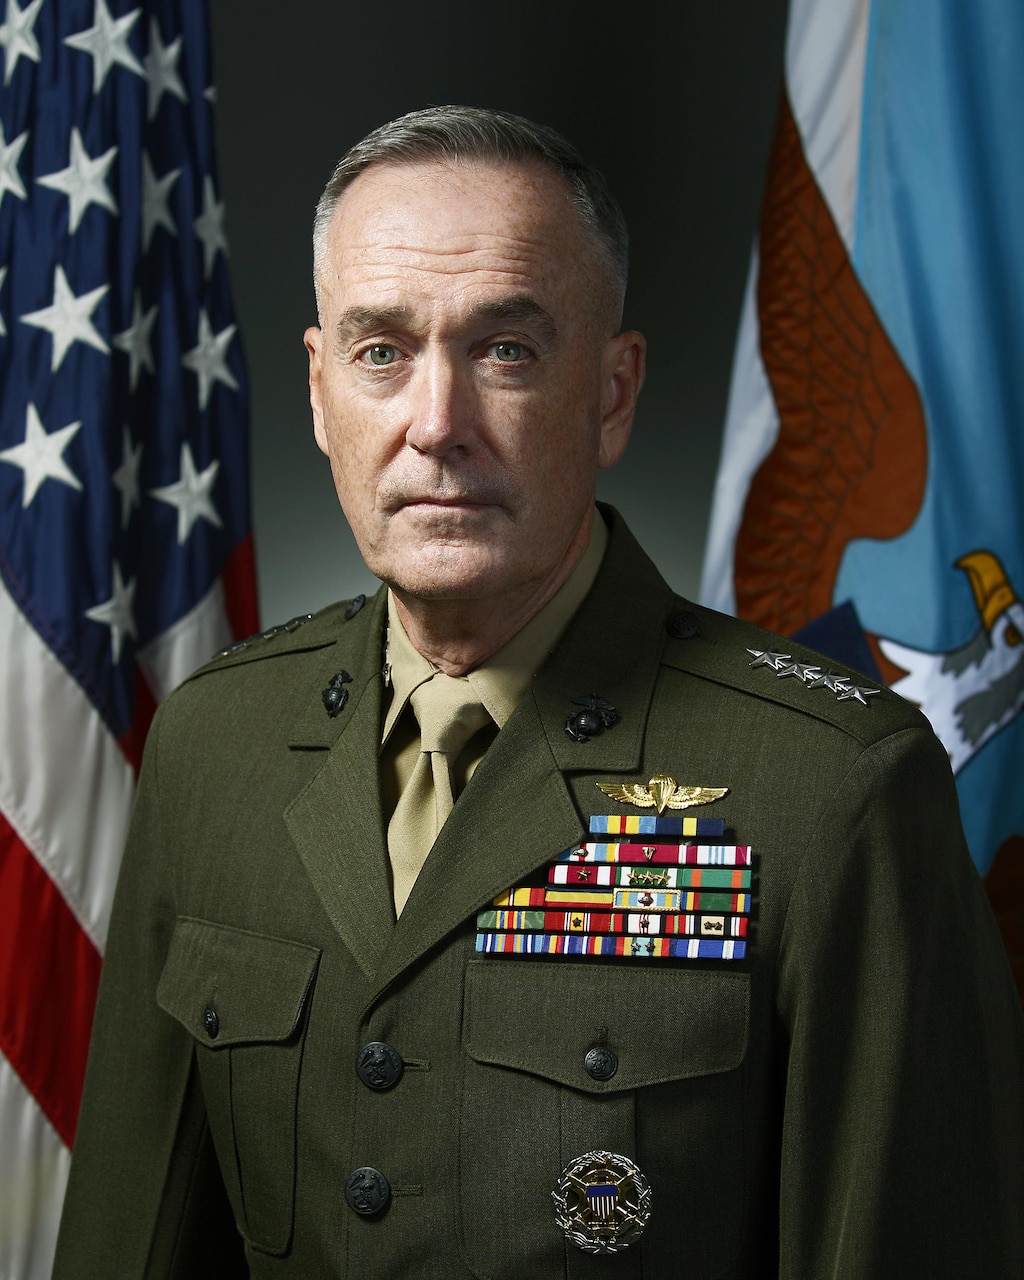 Marine Corps Gen. Joseph F. Dunford Jr. poses for an official portrait against a background with flags.